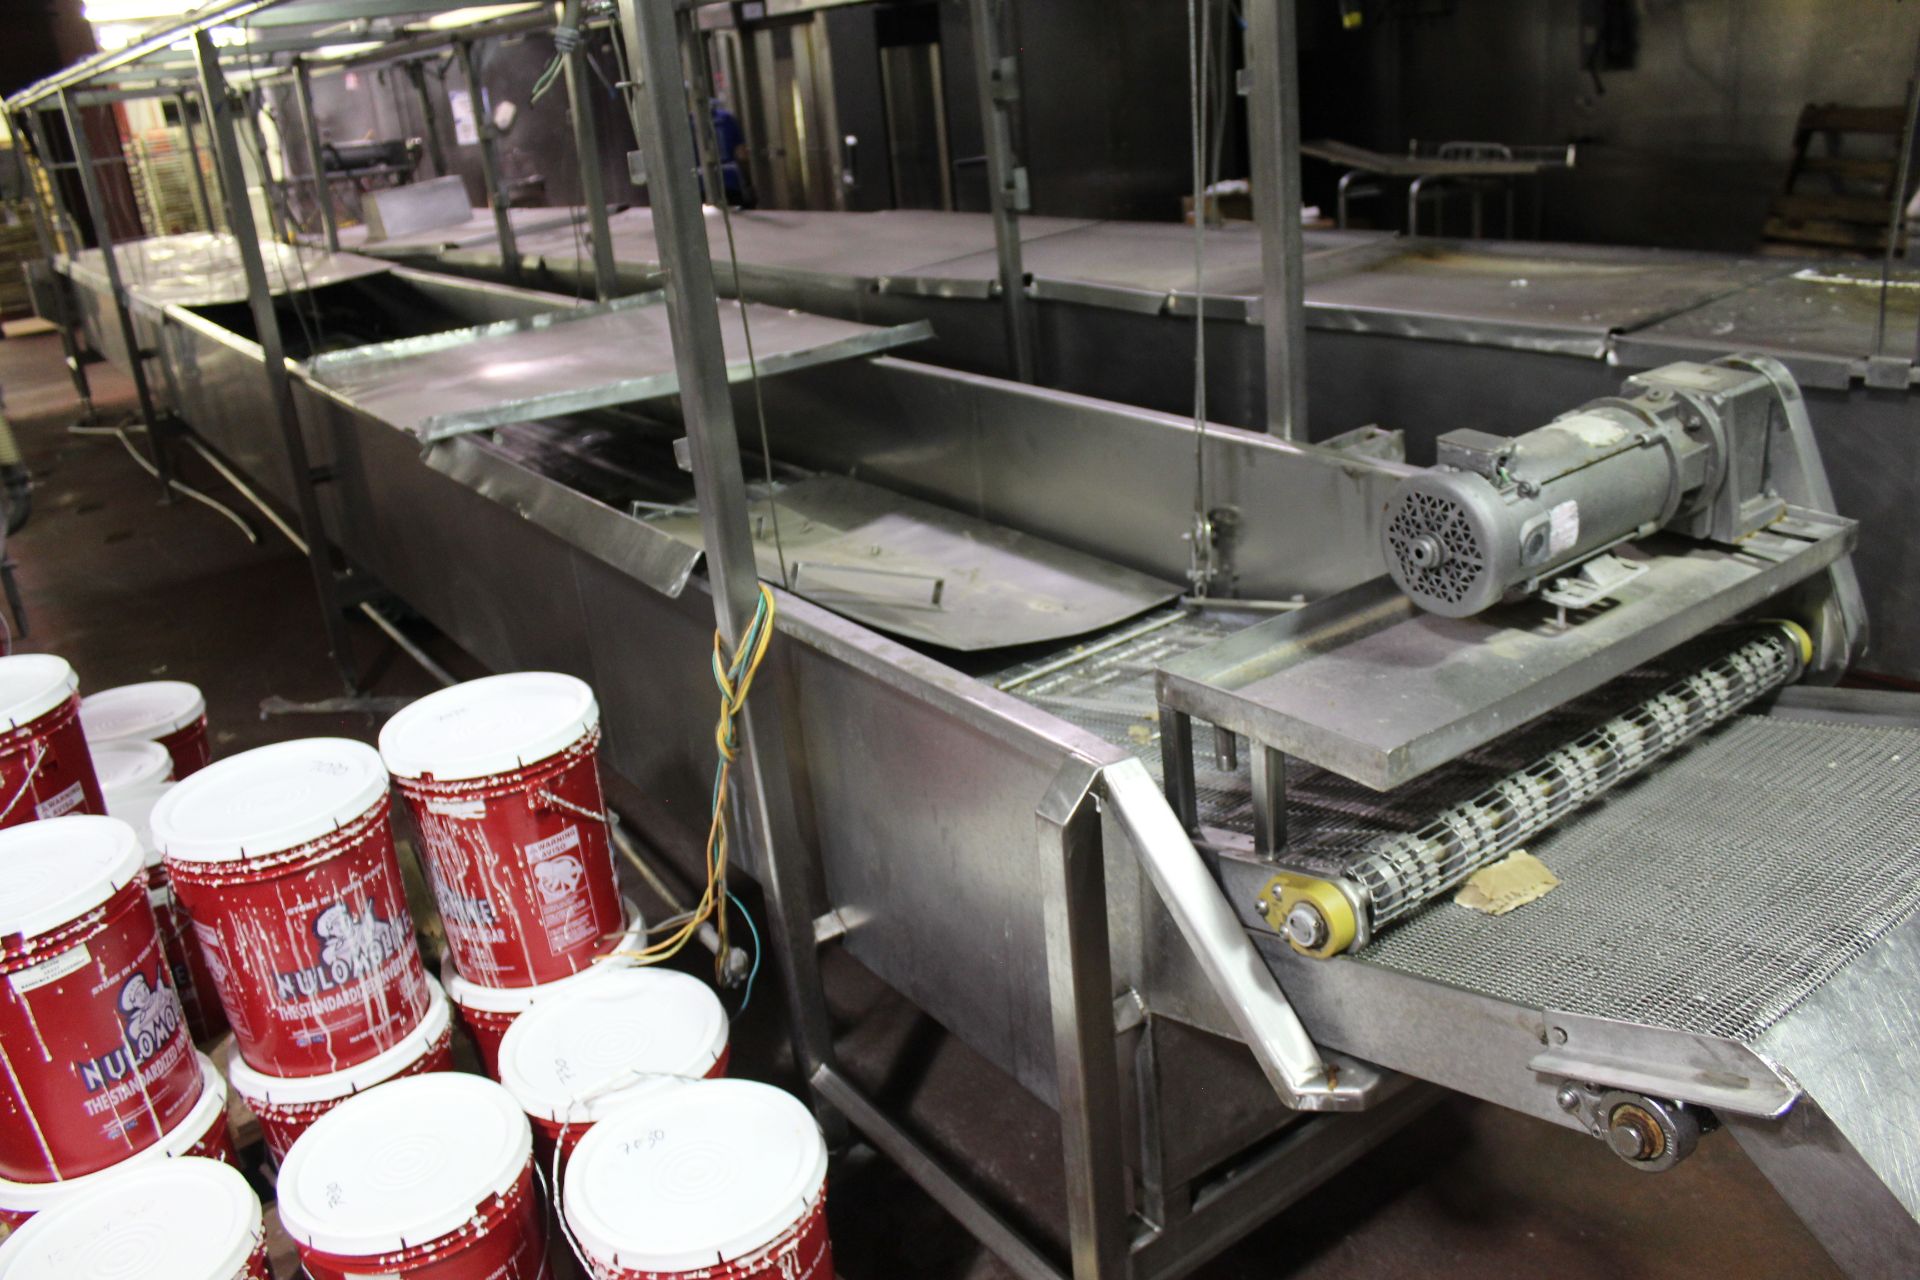 Stainless Steel Continuous Submersion Cooking Conveyor with Top Hold Down Belt, 30" Belt, 35"W X 23" - Image 4 of 4